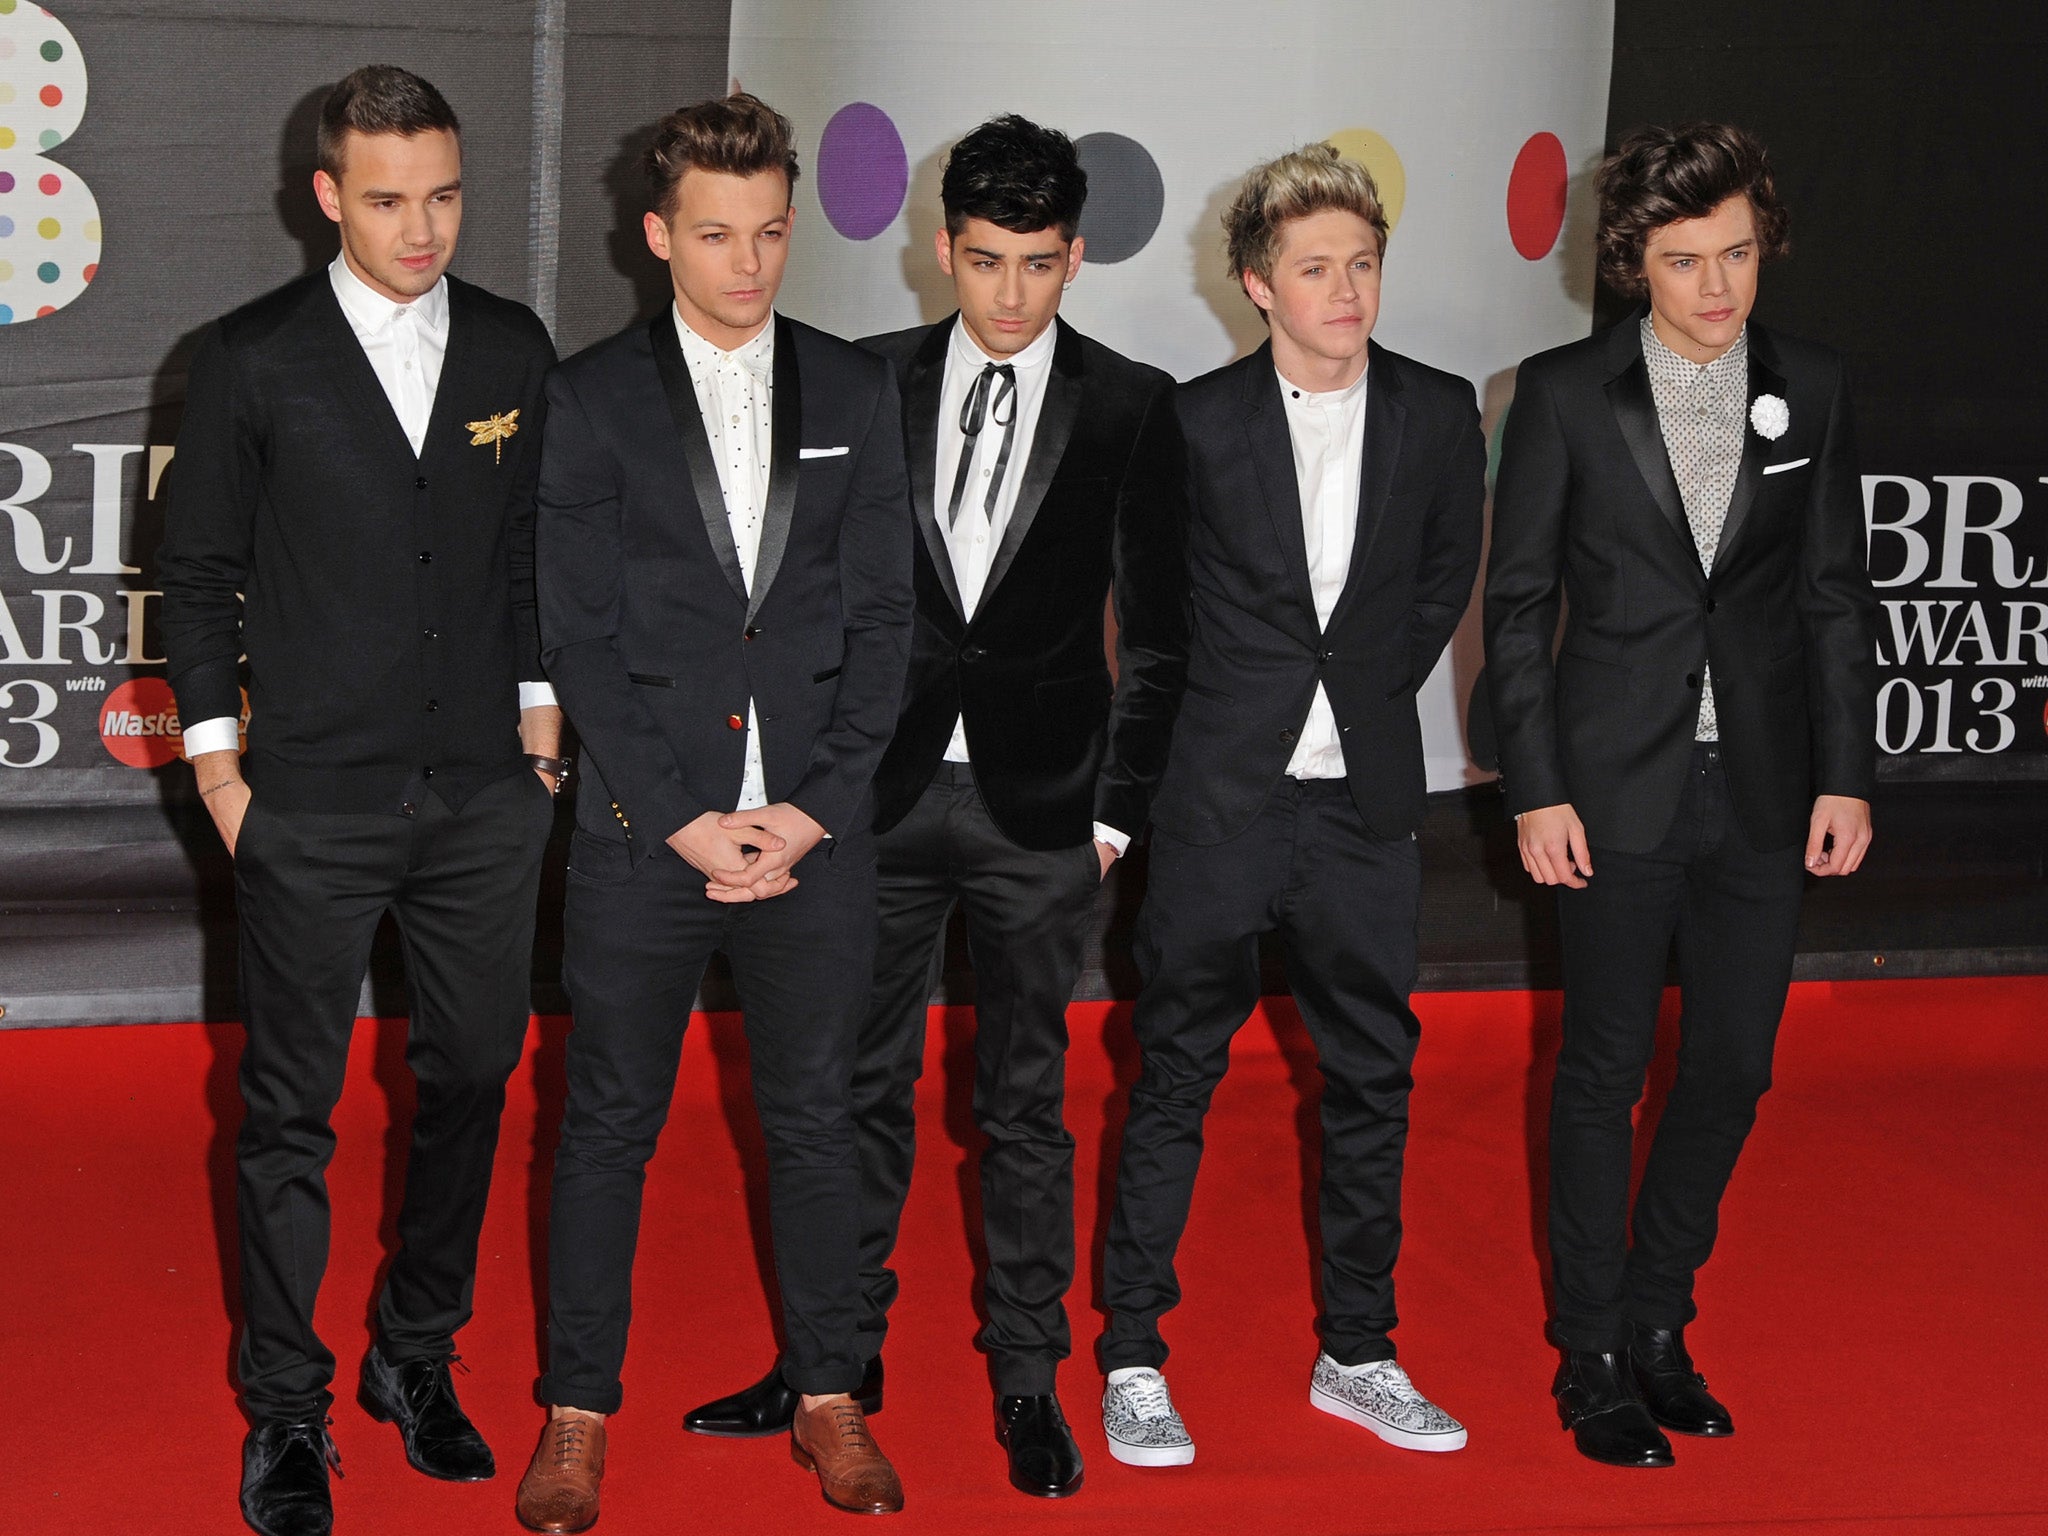 Liam Payne, Louis Tomlinson, Zayn Malik, Niall Horan and Harry Styles of One Direction attend the Brit Awards 2013 at the 02 Arena